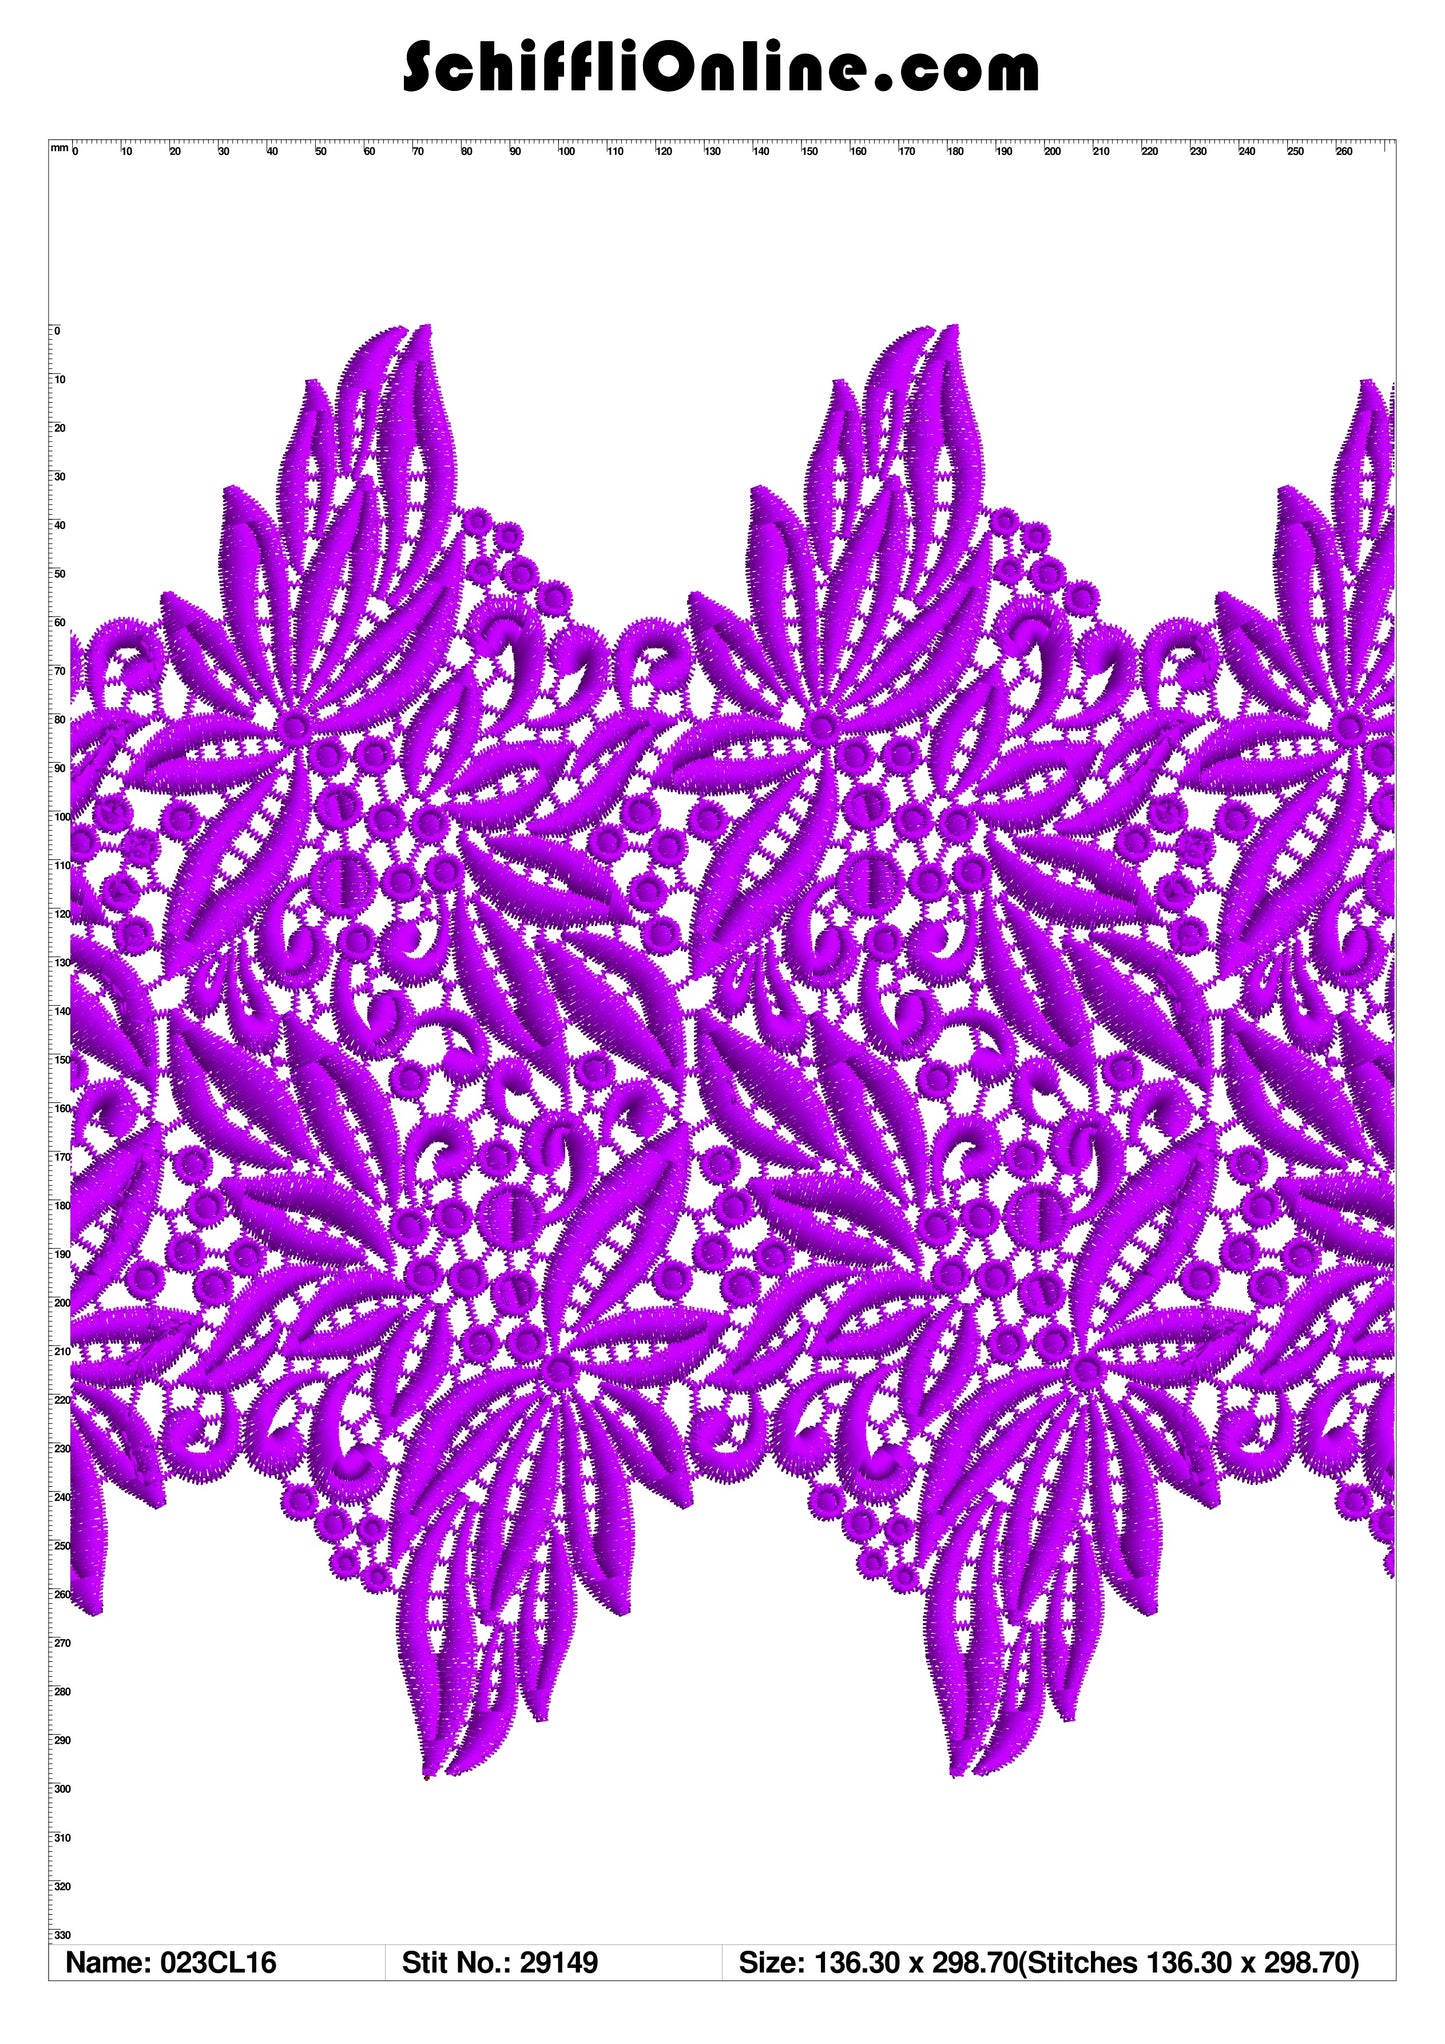 Book 293 CHEMICAL LACE 16X4 50 DESIGNS